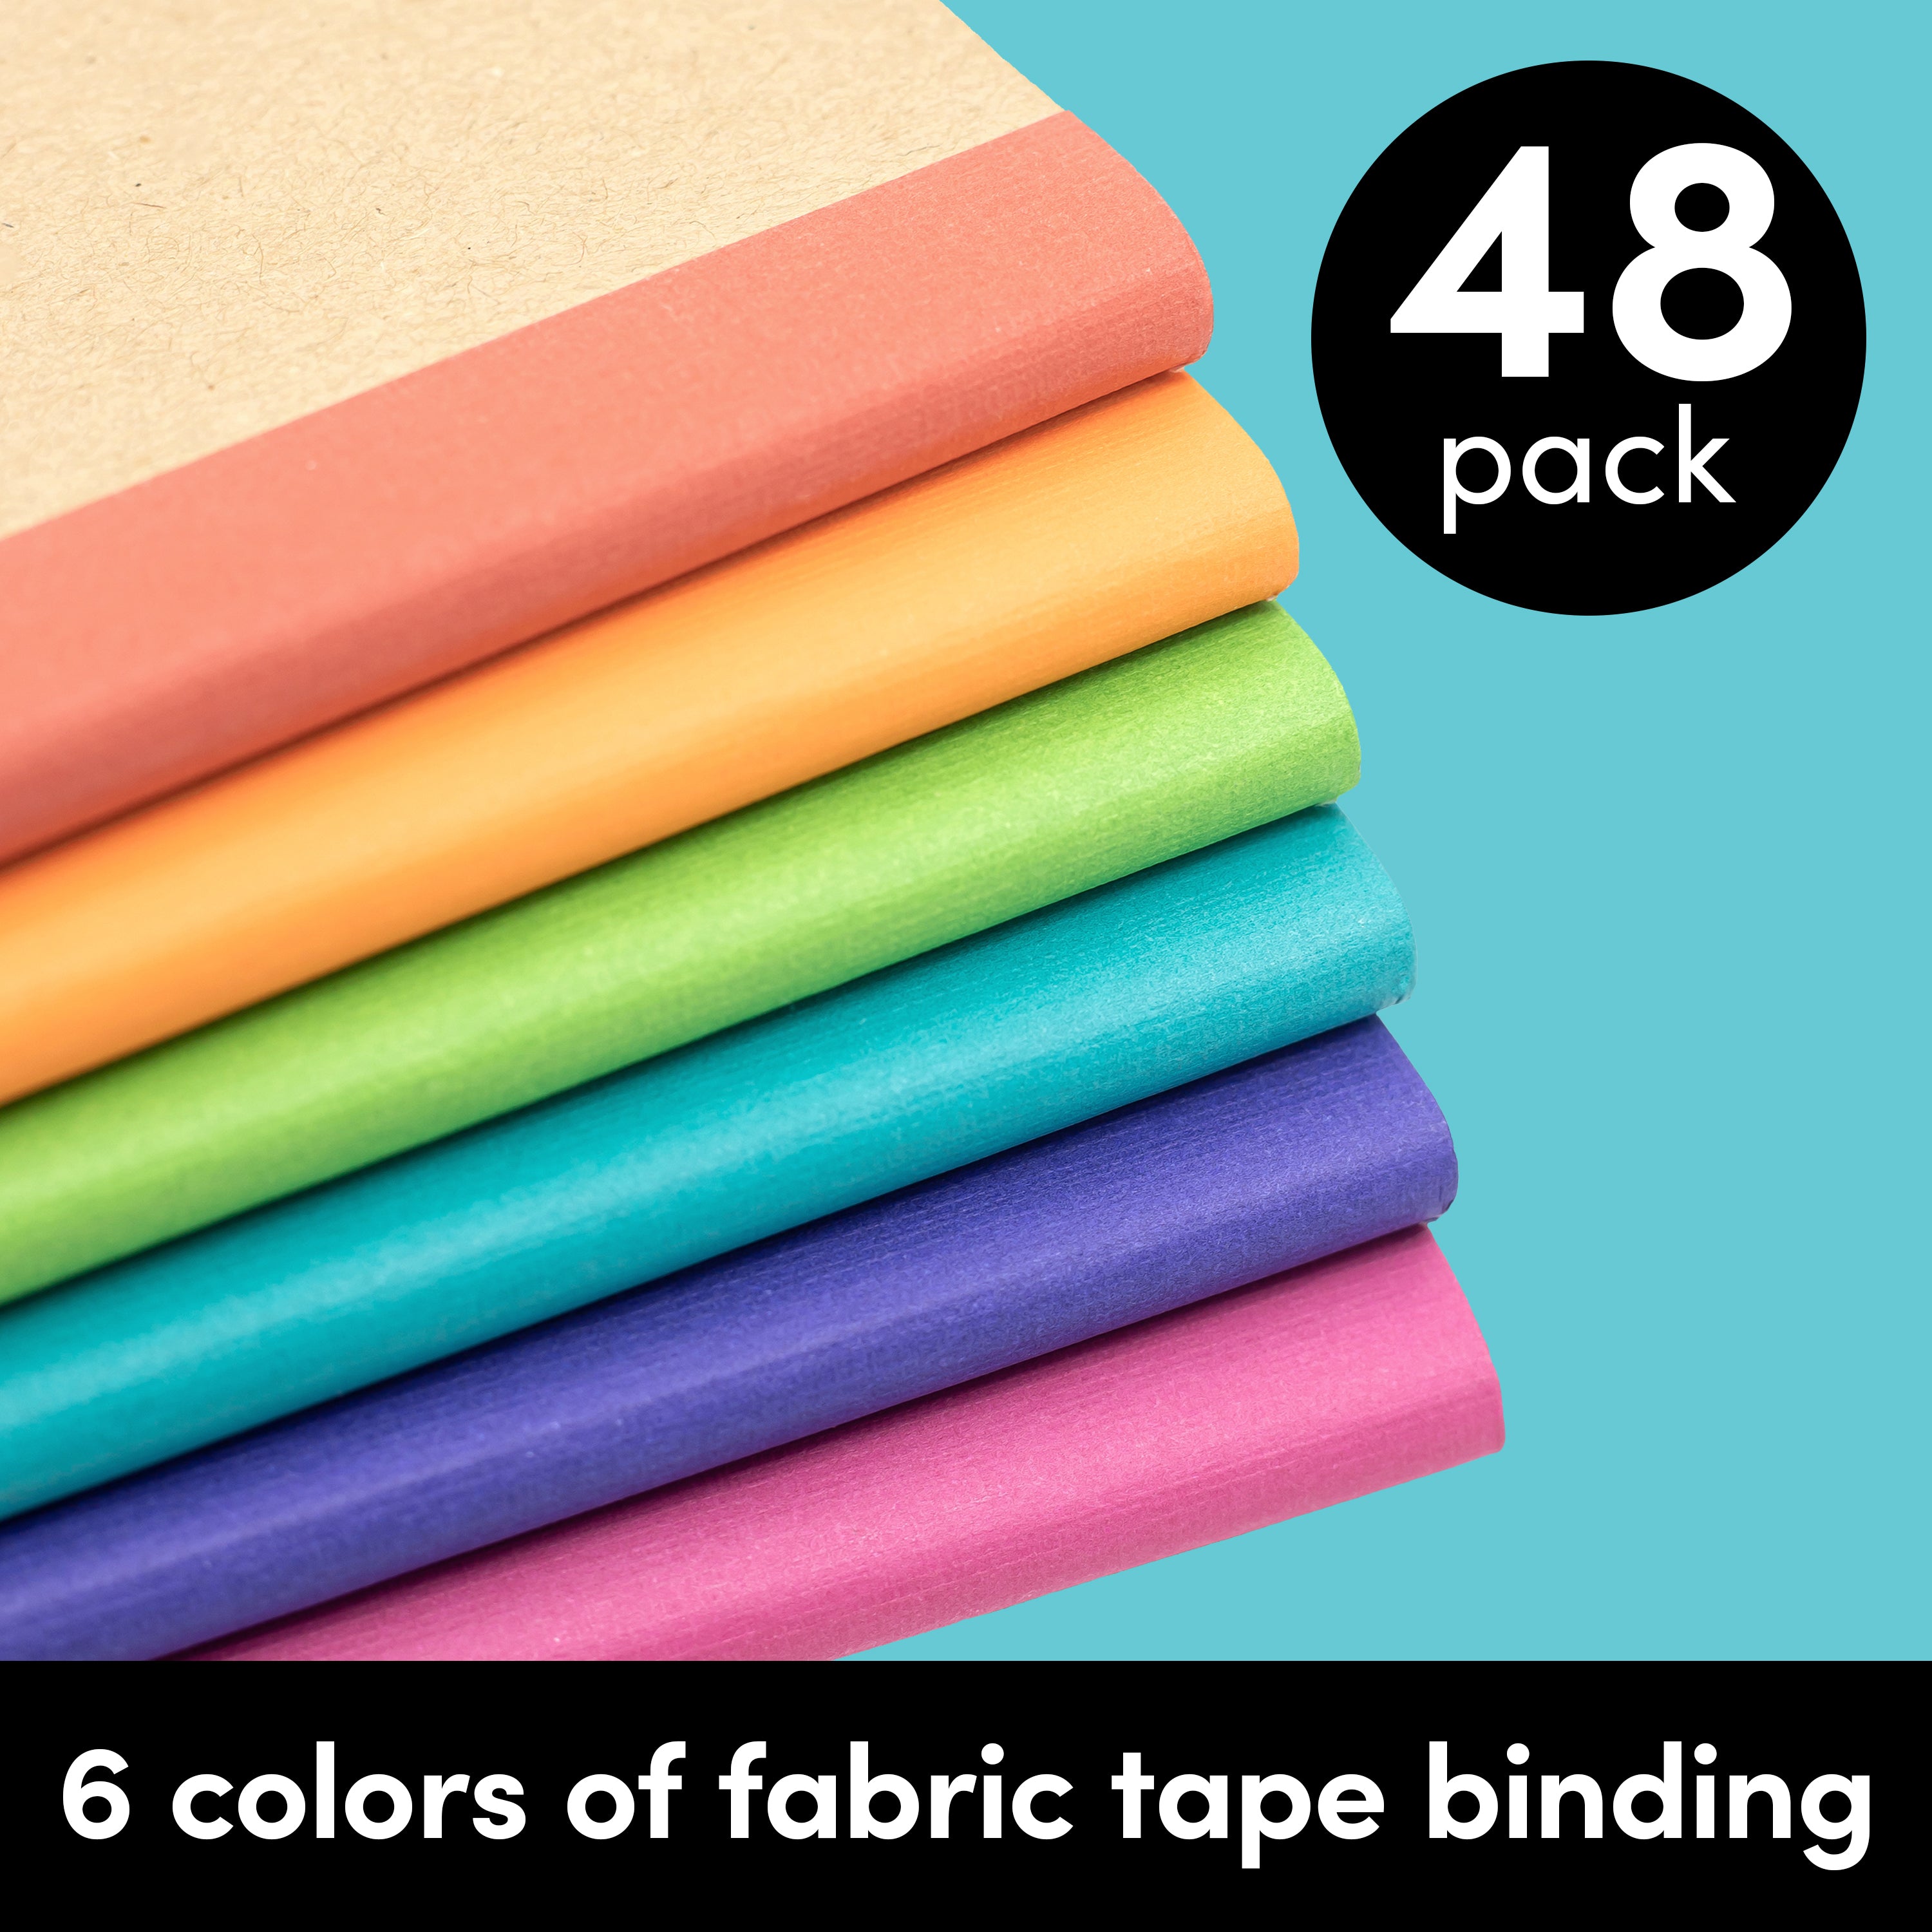 48 Pack Rainbow Spine Kraft Cover Composition Notebooks (5.75 in x 8 in)